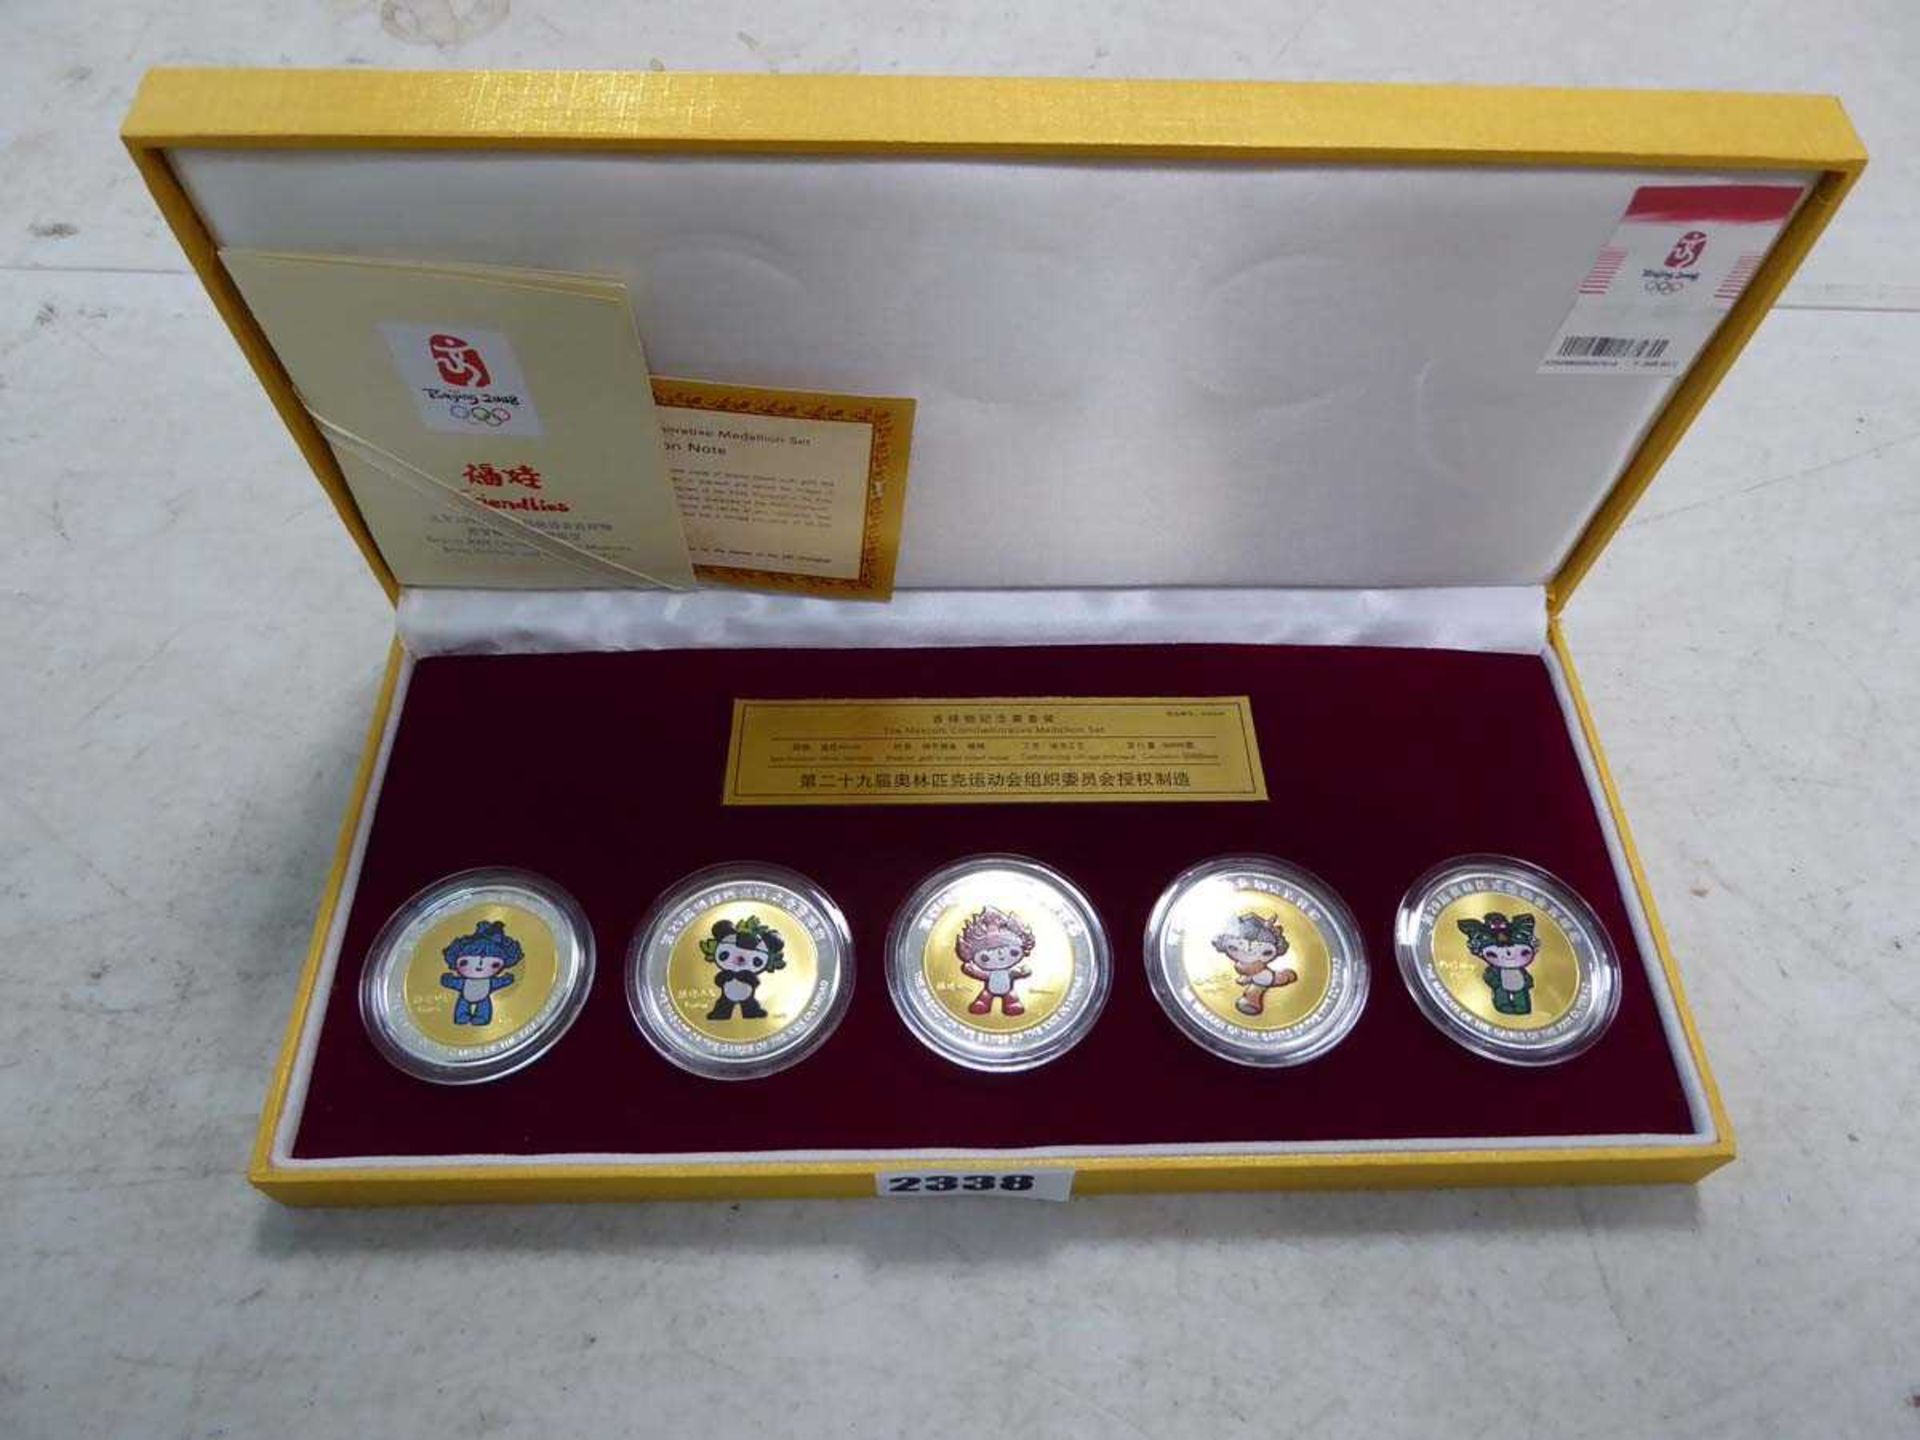 Beijing 2002 Olympic collectors coin sets, bronze plated coins x 5 in set